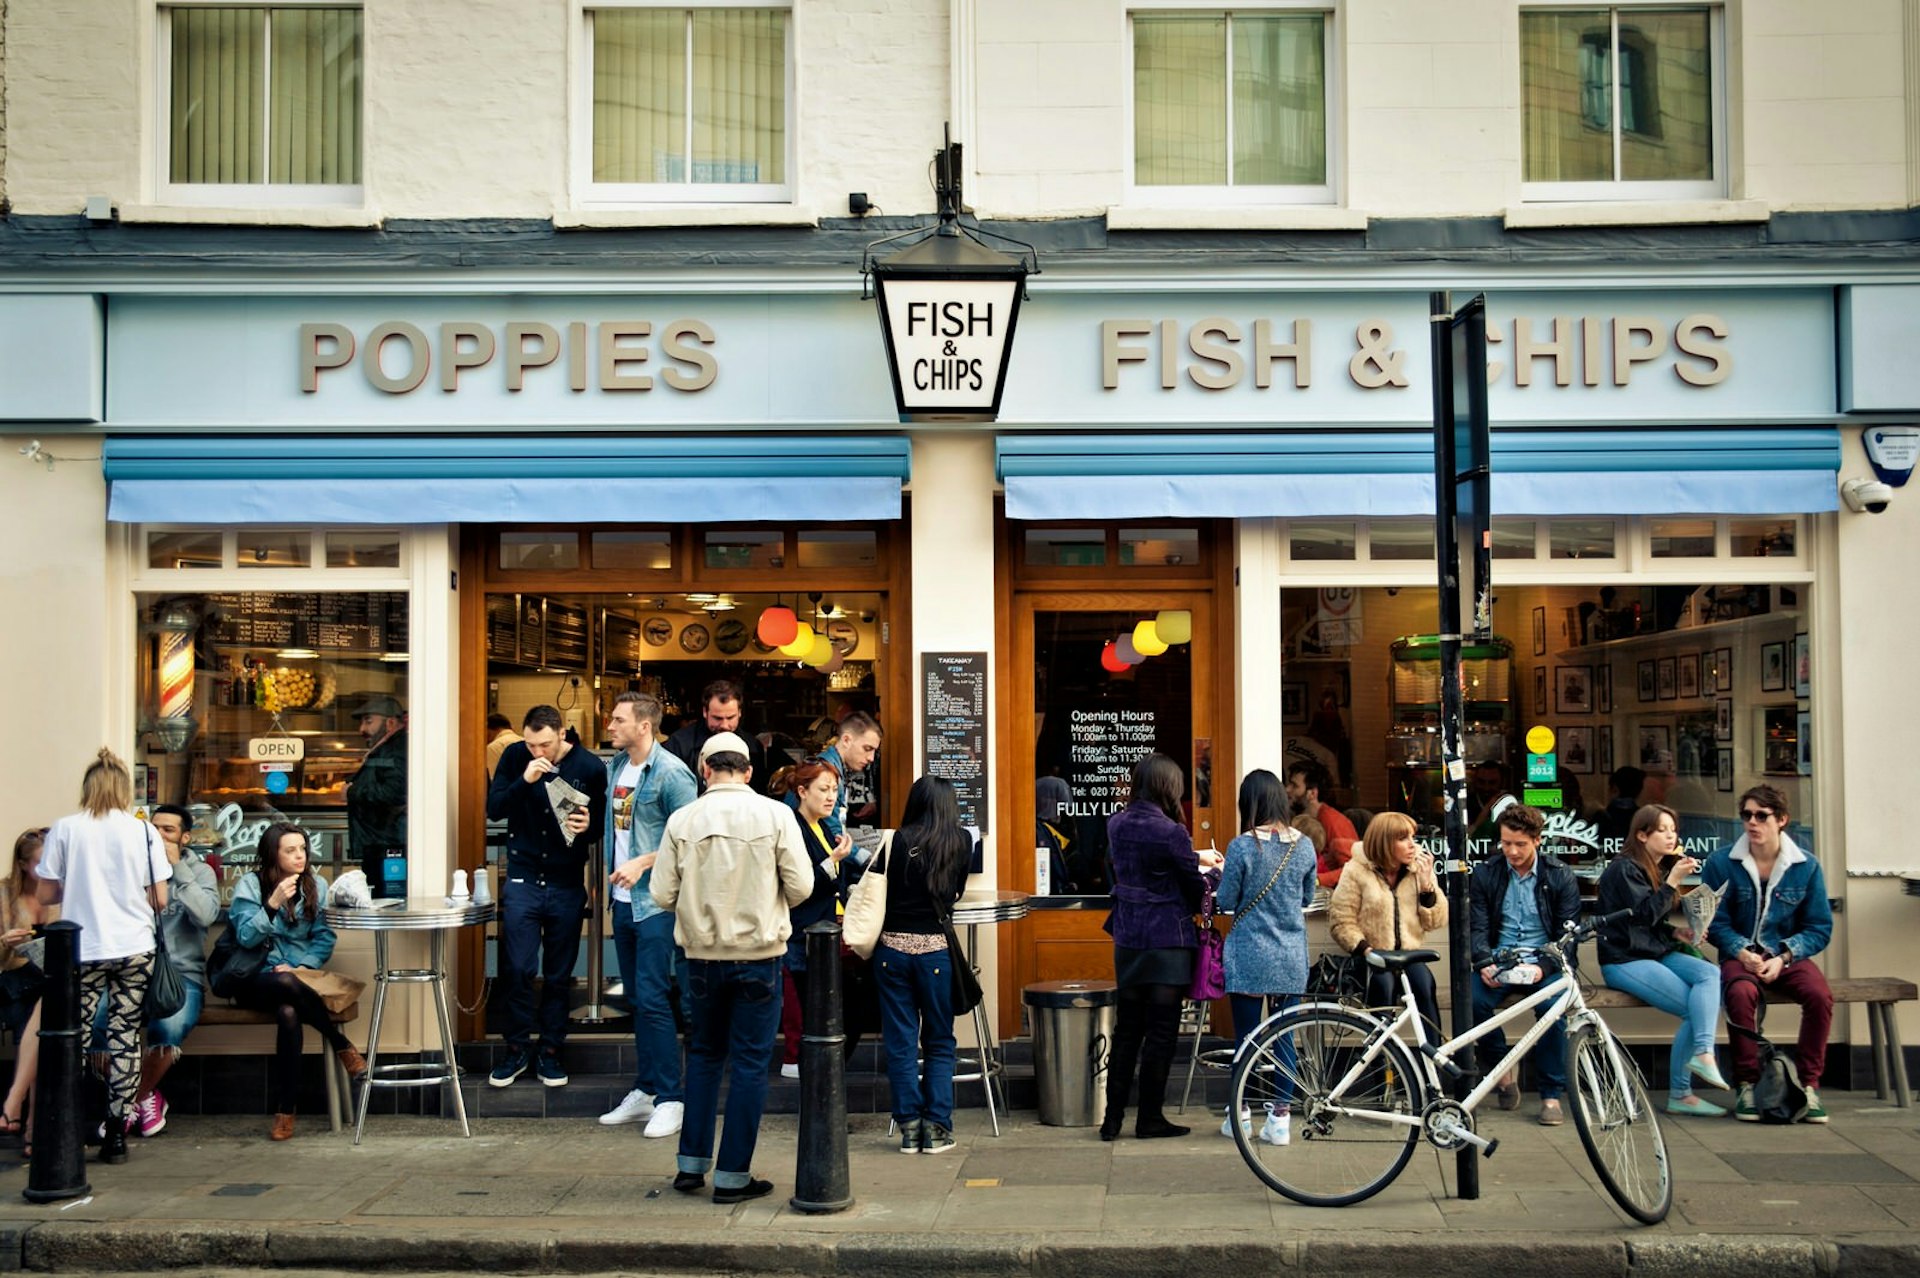 Poppies recreates a 1950s East End fish and chips shop in east London